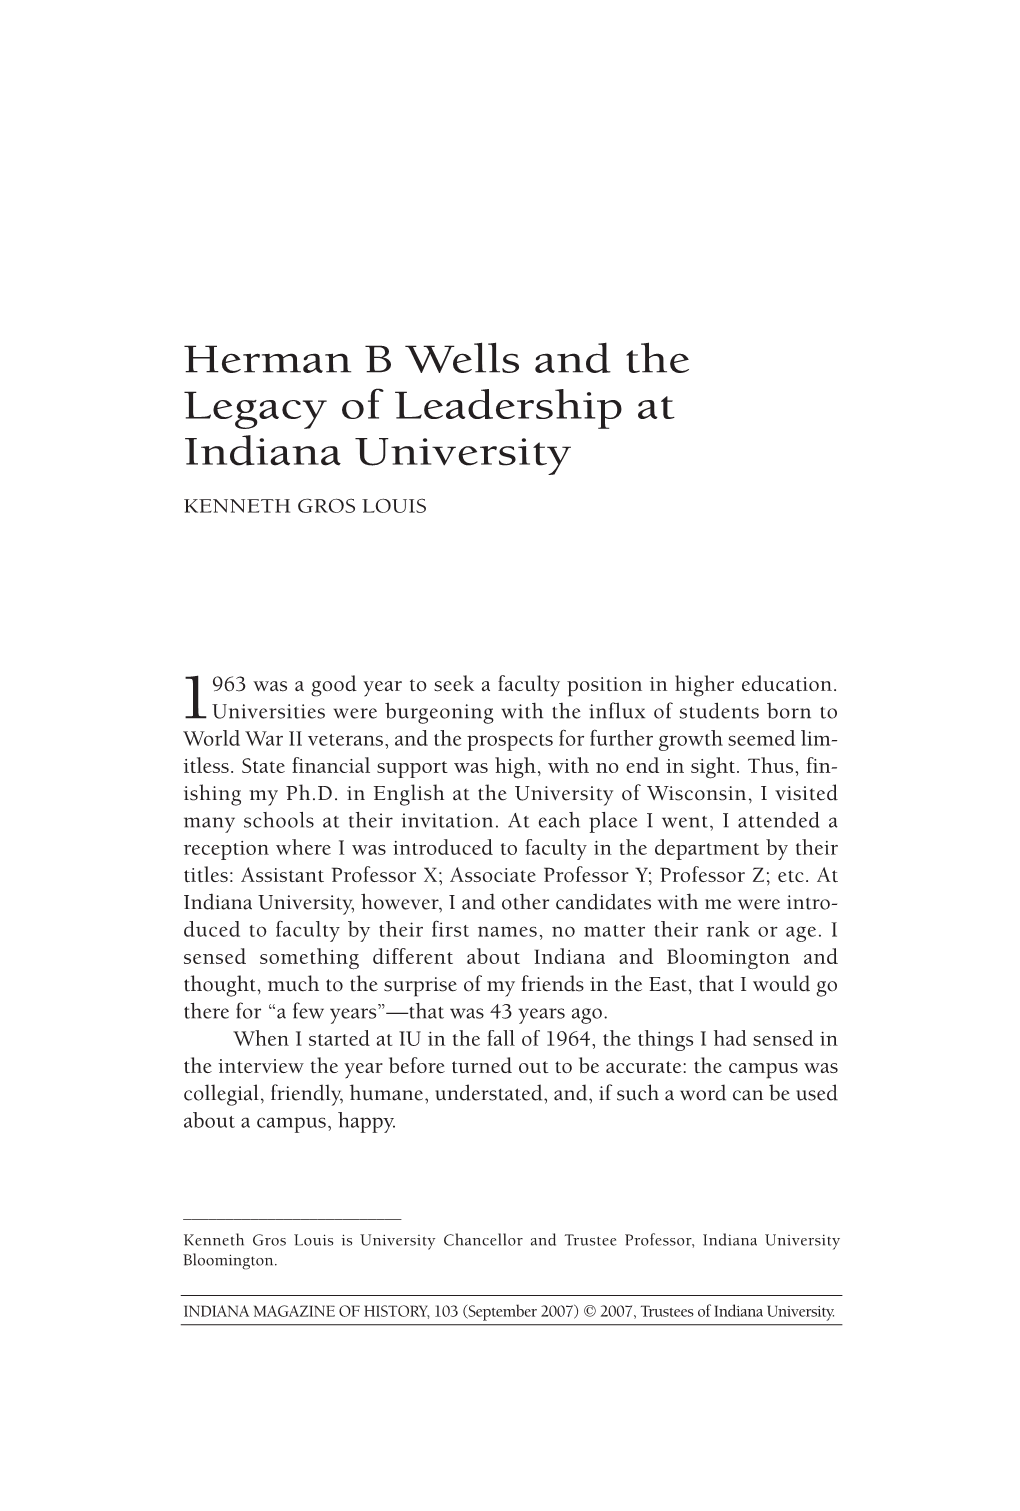 Kenneth Gros Louis's Herman B Wells and the Legacy of Leadership At